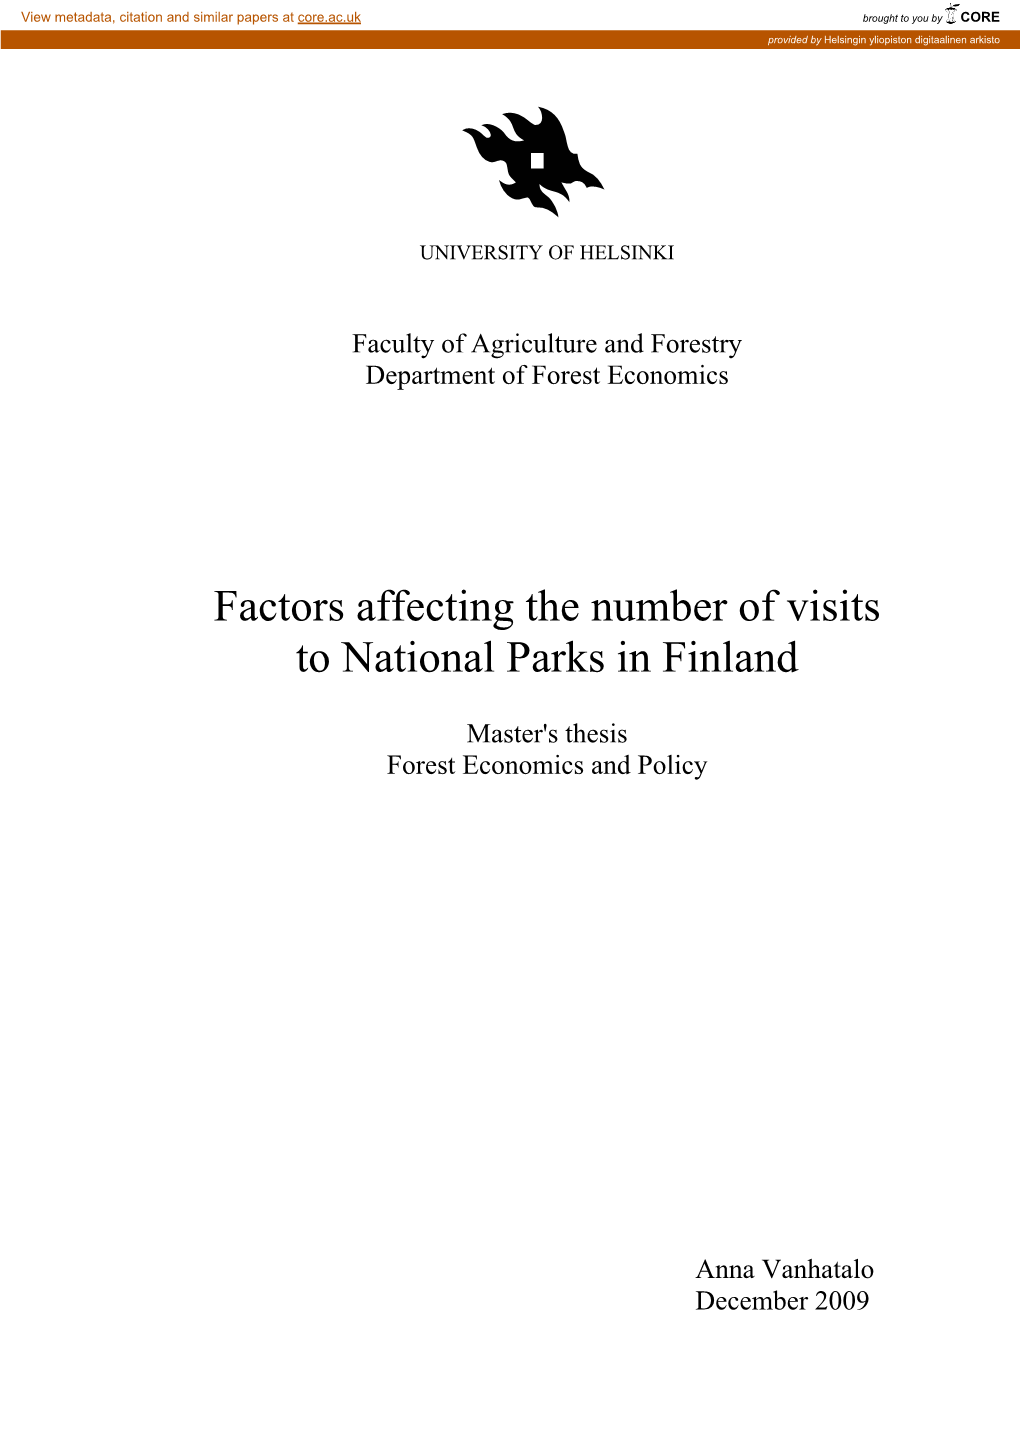 Factors Affecting the Number of Visits to National Parks in Finland